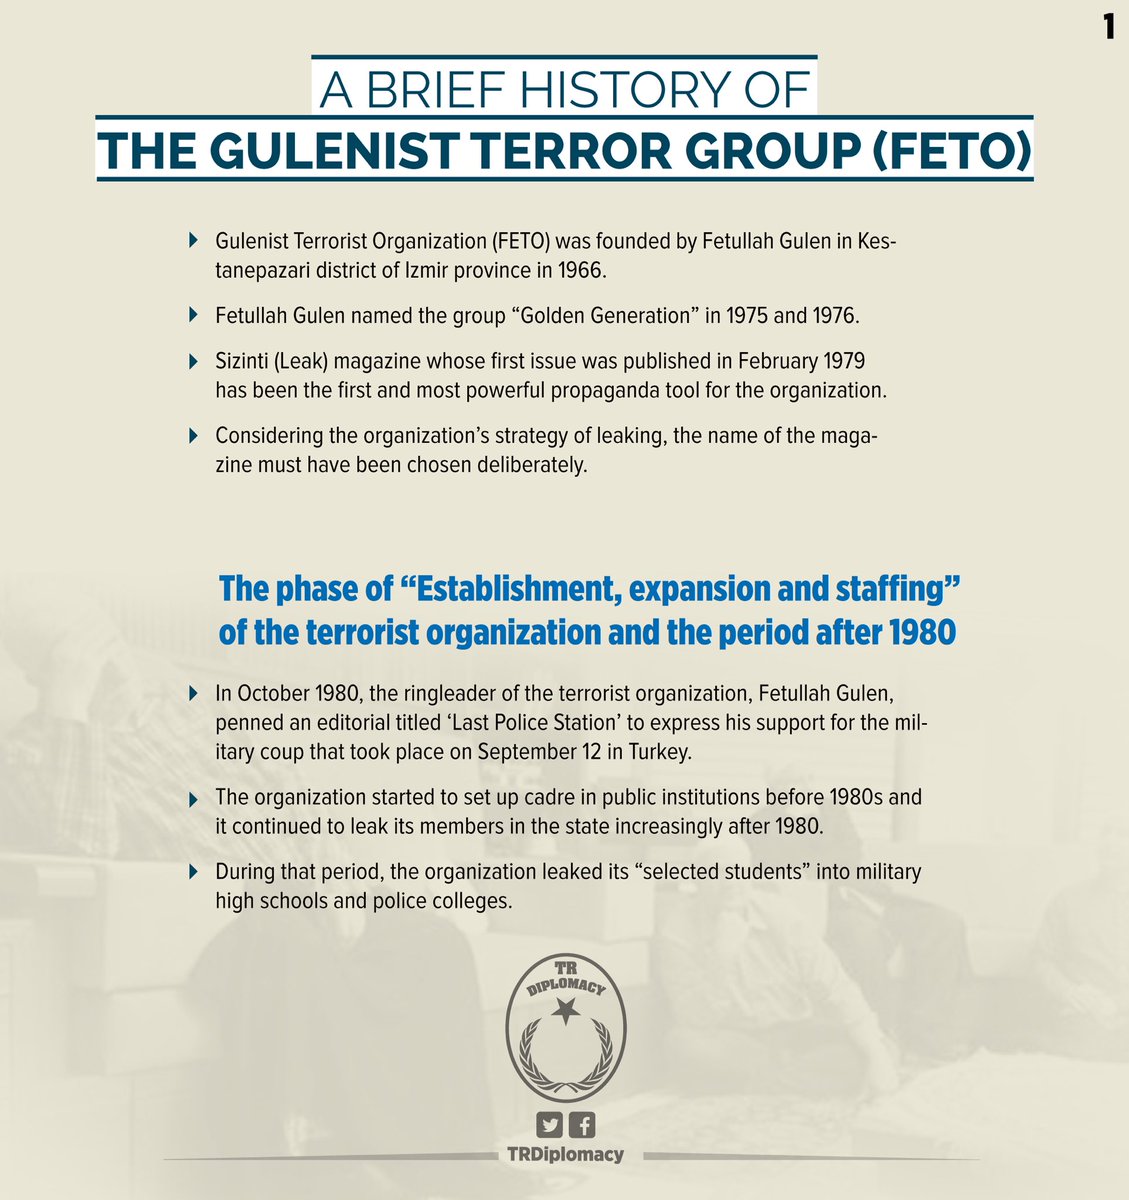 A brief history of the Gulenist Terror Group (FETO)